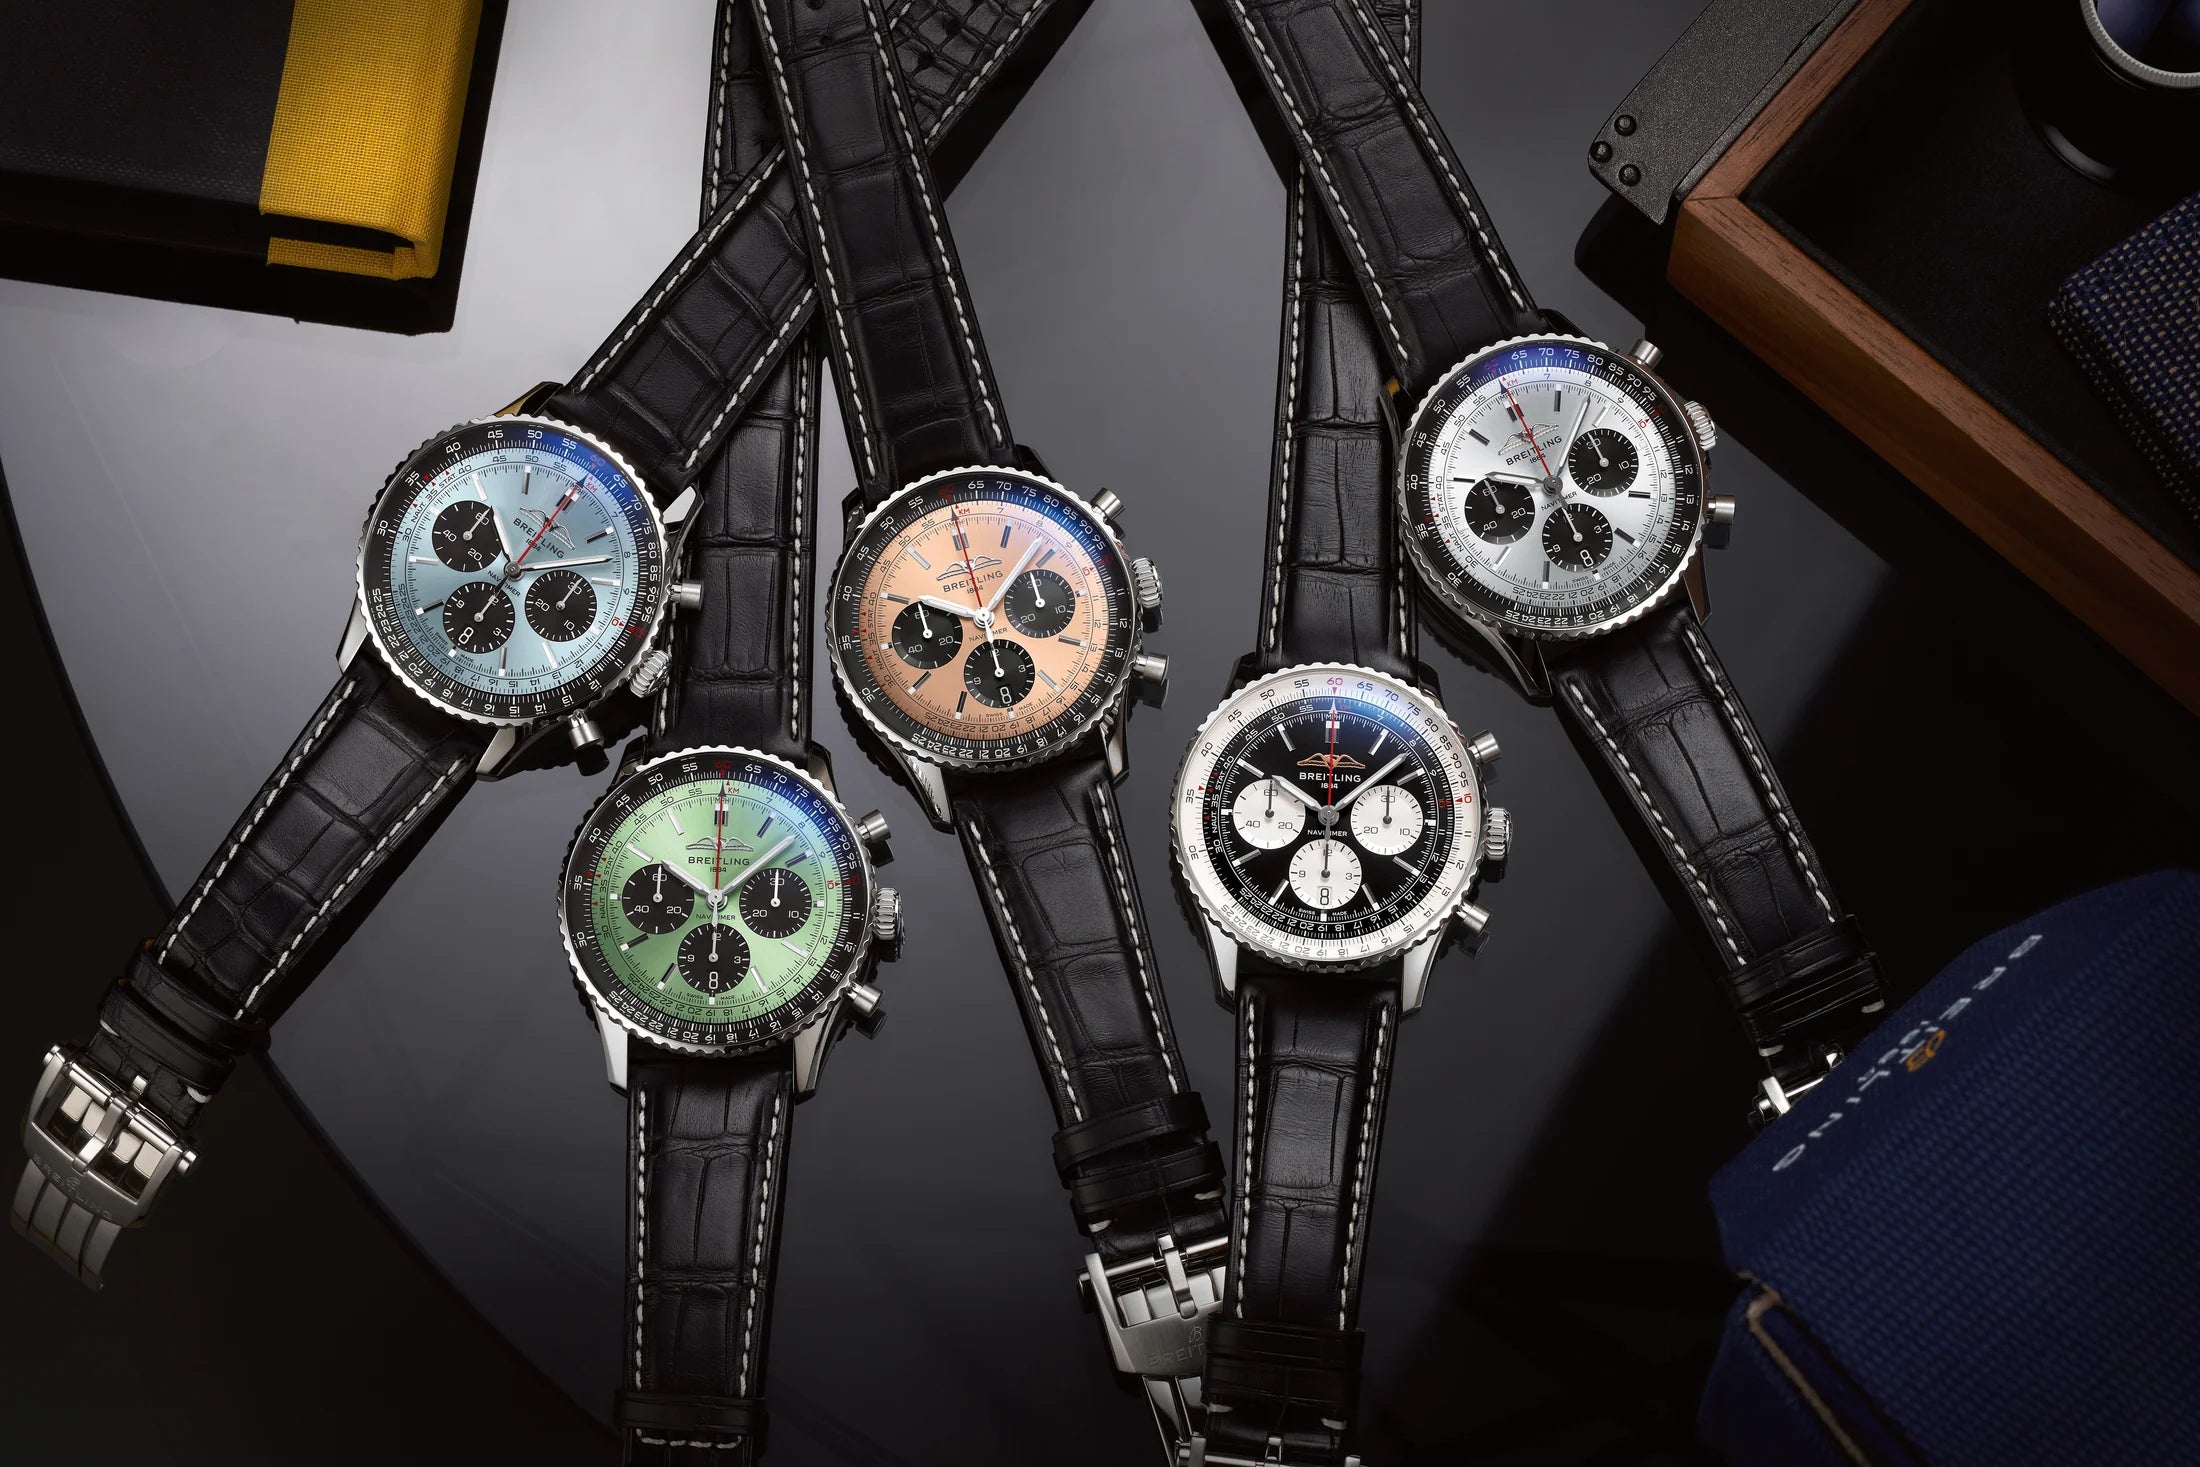 WHAT ARE SWISS CHRONOGRAPHS?